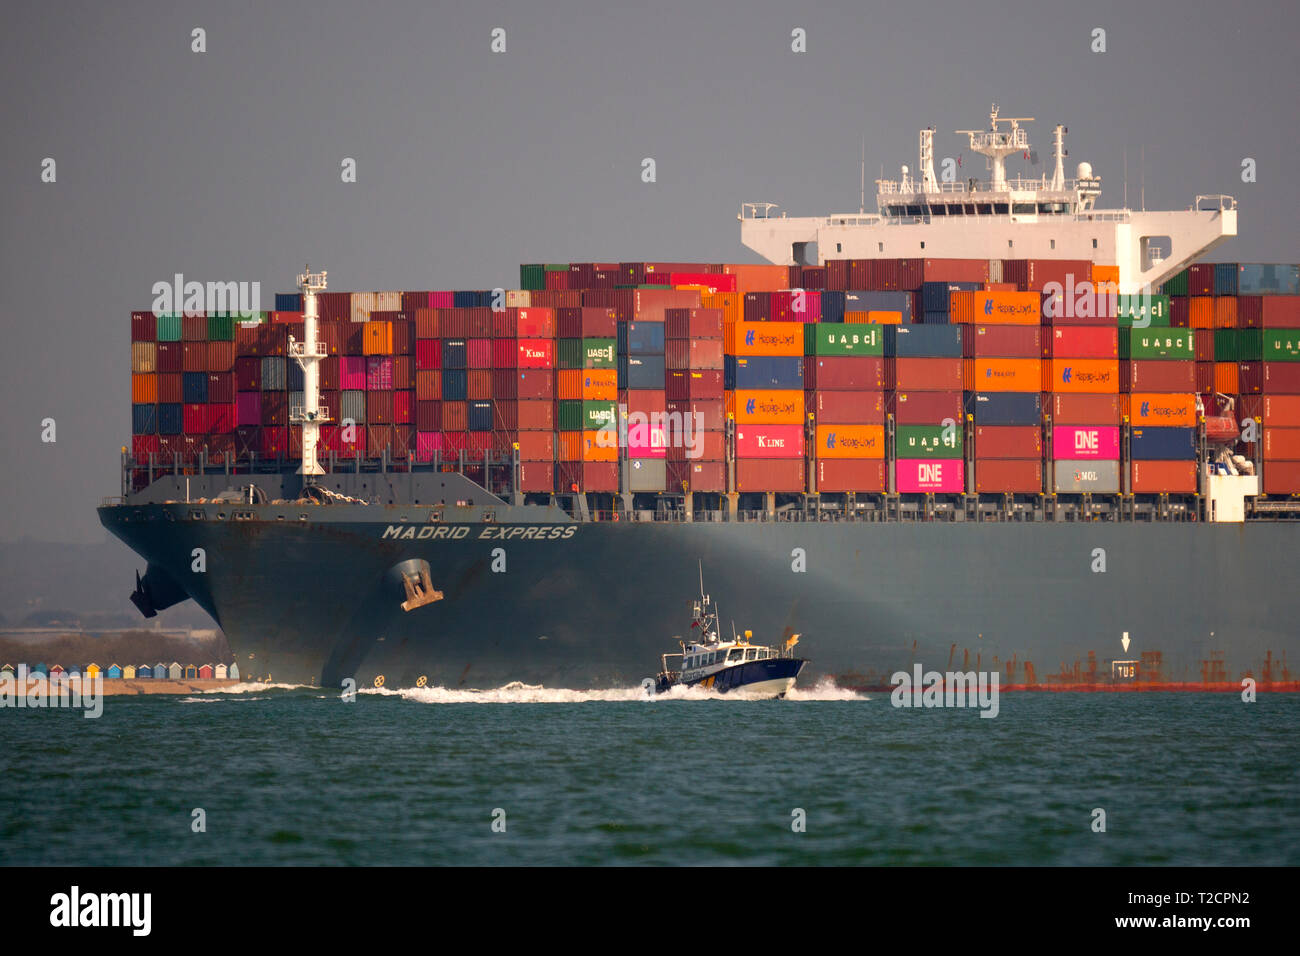 close up,Container,Ship,Madrid,Express,Southampton,Port,Harbour,Escourt,Launch,services,Master,departure,water,The Solent,Cowes,Isle of Wight,UK, Stock Photo